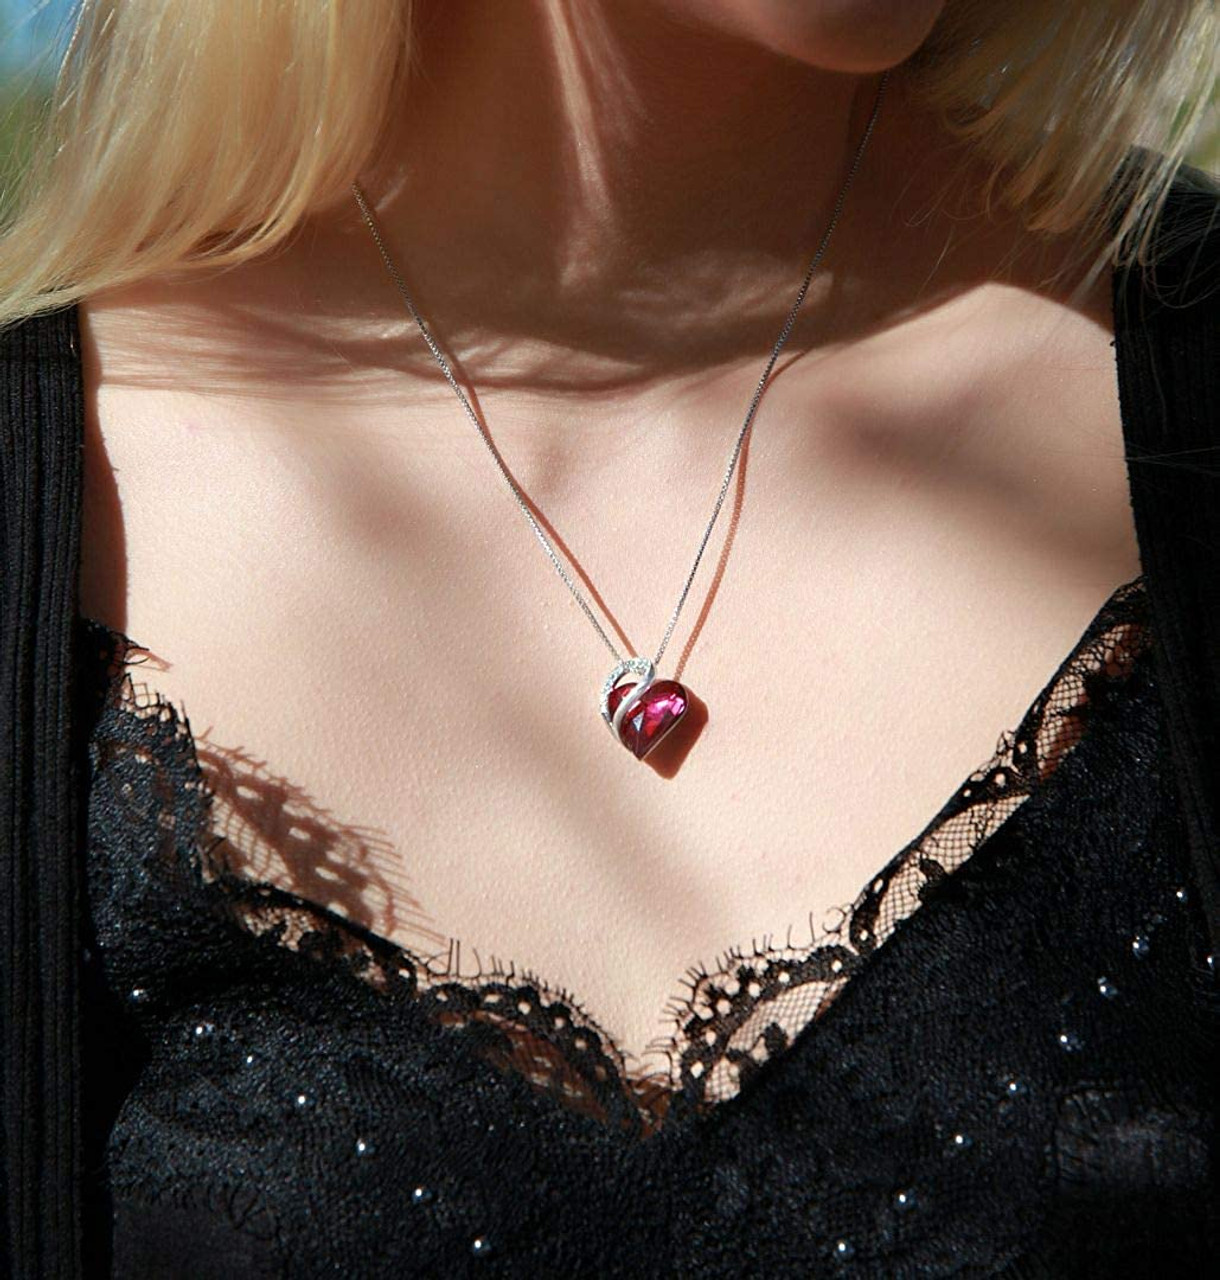 February Birthstone - Amethyst Dark Pink Looped Heart Design Crystal Pendant and CZ stones - with 18" Chain Necklace. Gift for Lover, Girl Friend, Wife, Valentine's Day Gift, Mother's Day, Anniversary Gift Heart Necklace.